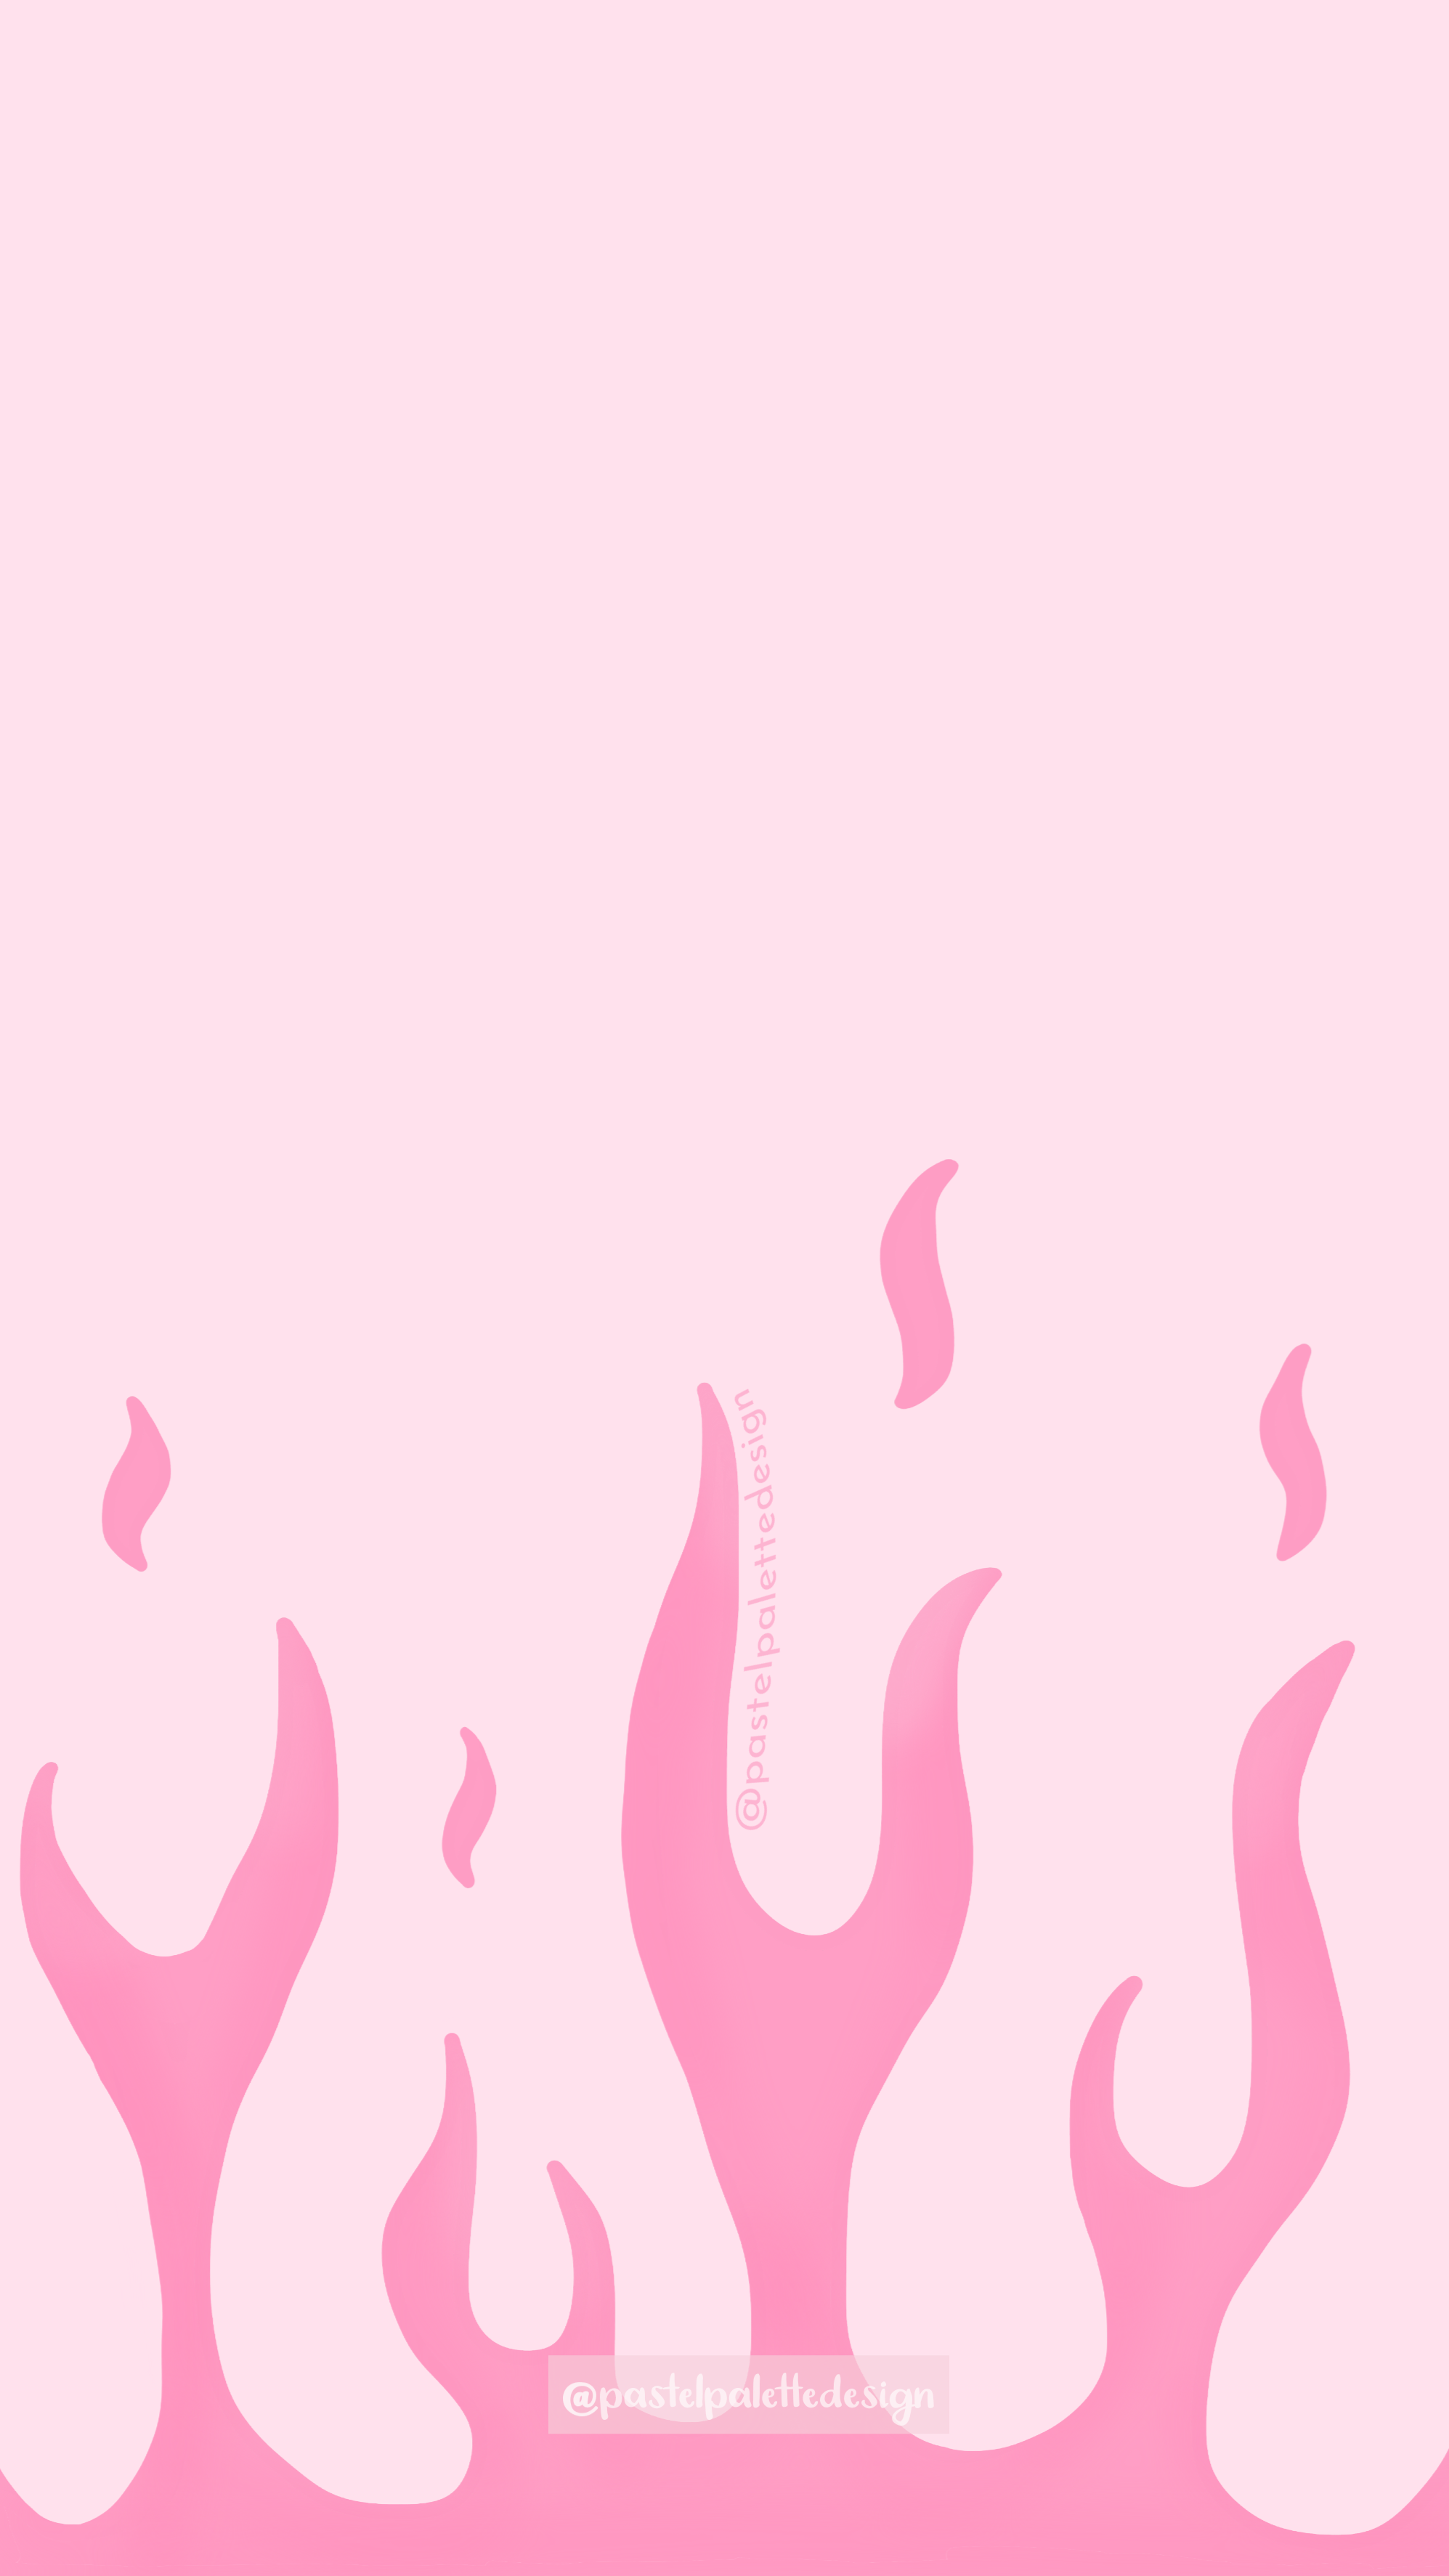 Pink flame background wallpaper for phone or desktop - Fire